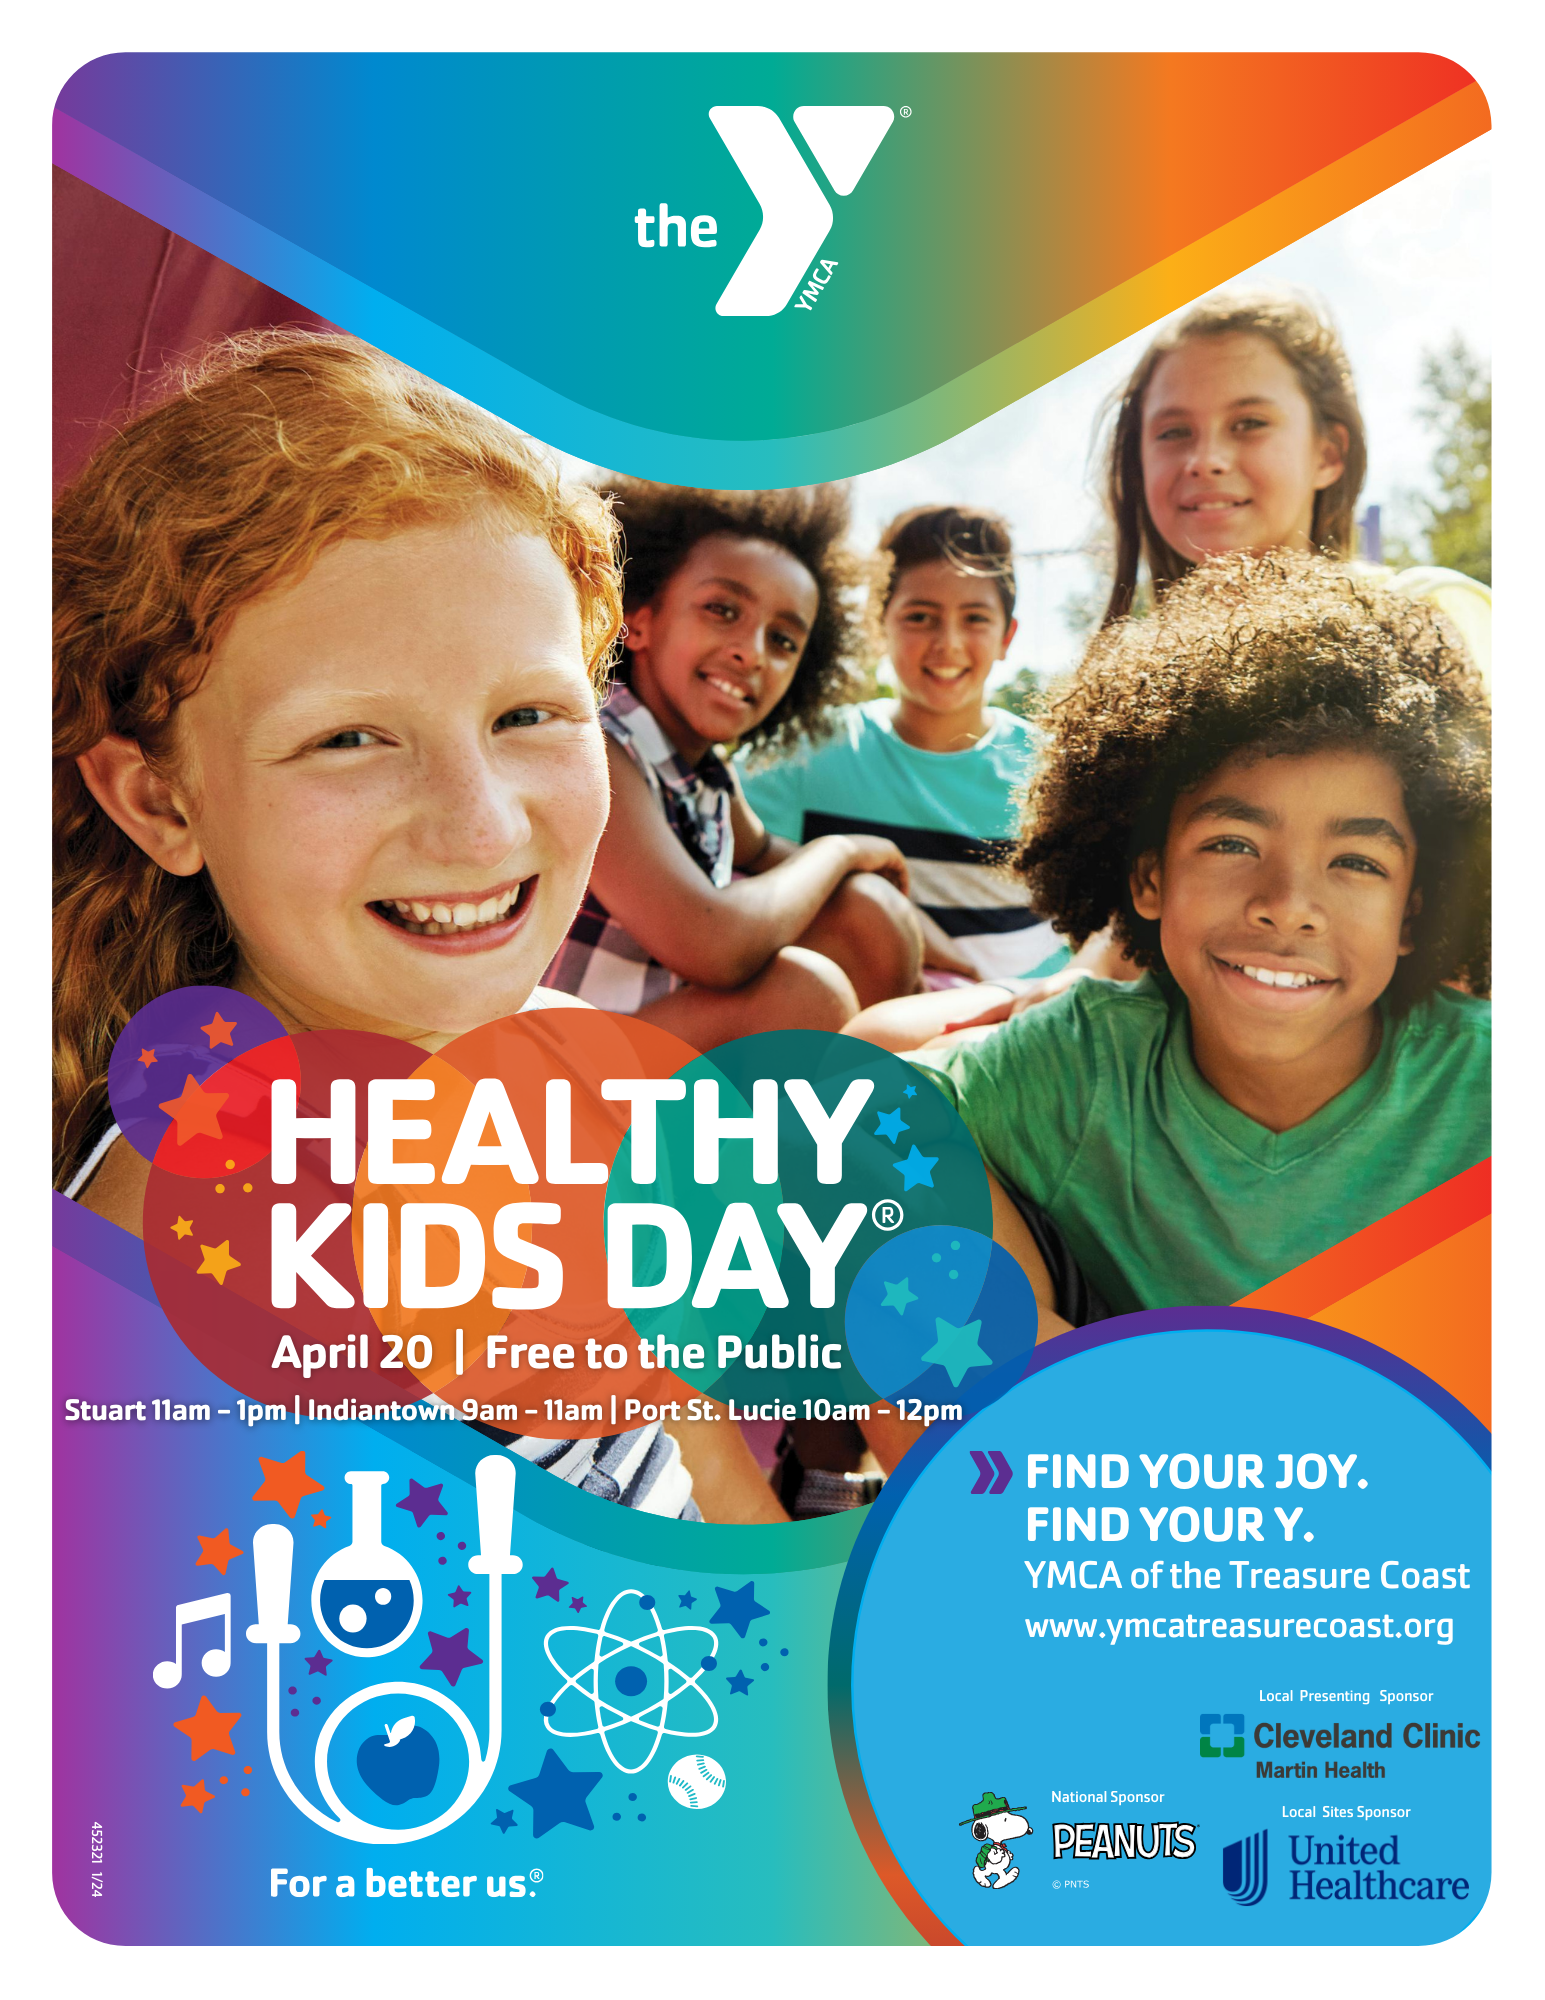 Healthy Kids Day! April 20th Free to the Public – Stuart 11 am – 1 pm., Indiantown 9 am – 11 am, Port St. Lucie 10 am – 12 pm.  Find Your joy, Find your Y. YMCA of the Treasure Coast www.ymcatreasurecoast.com